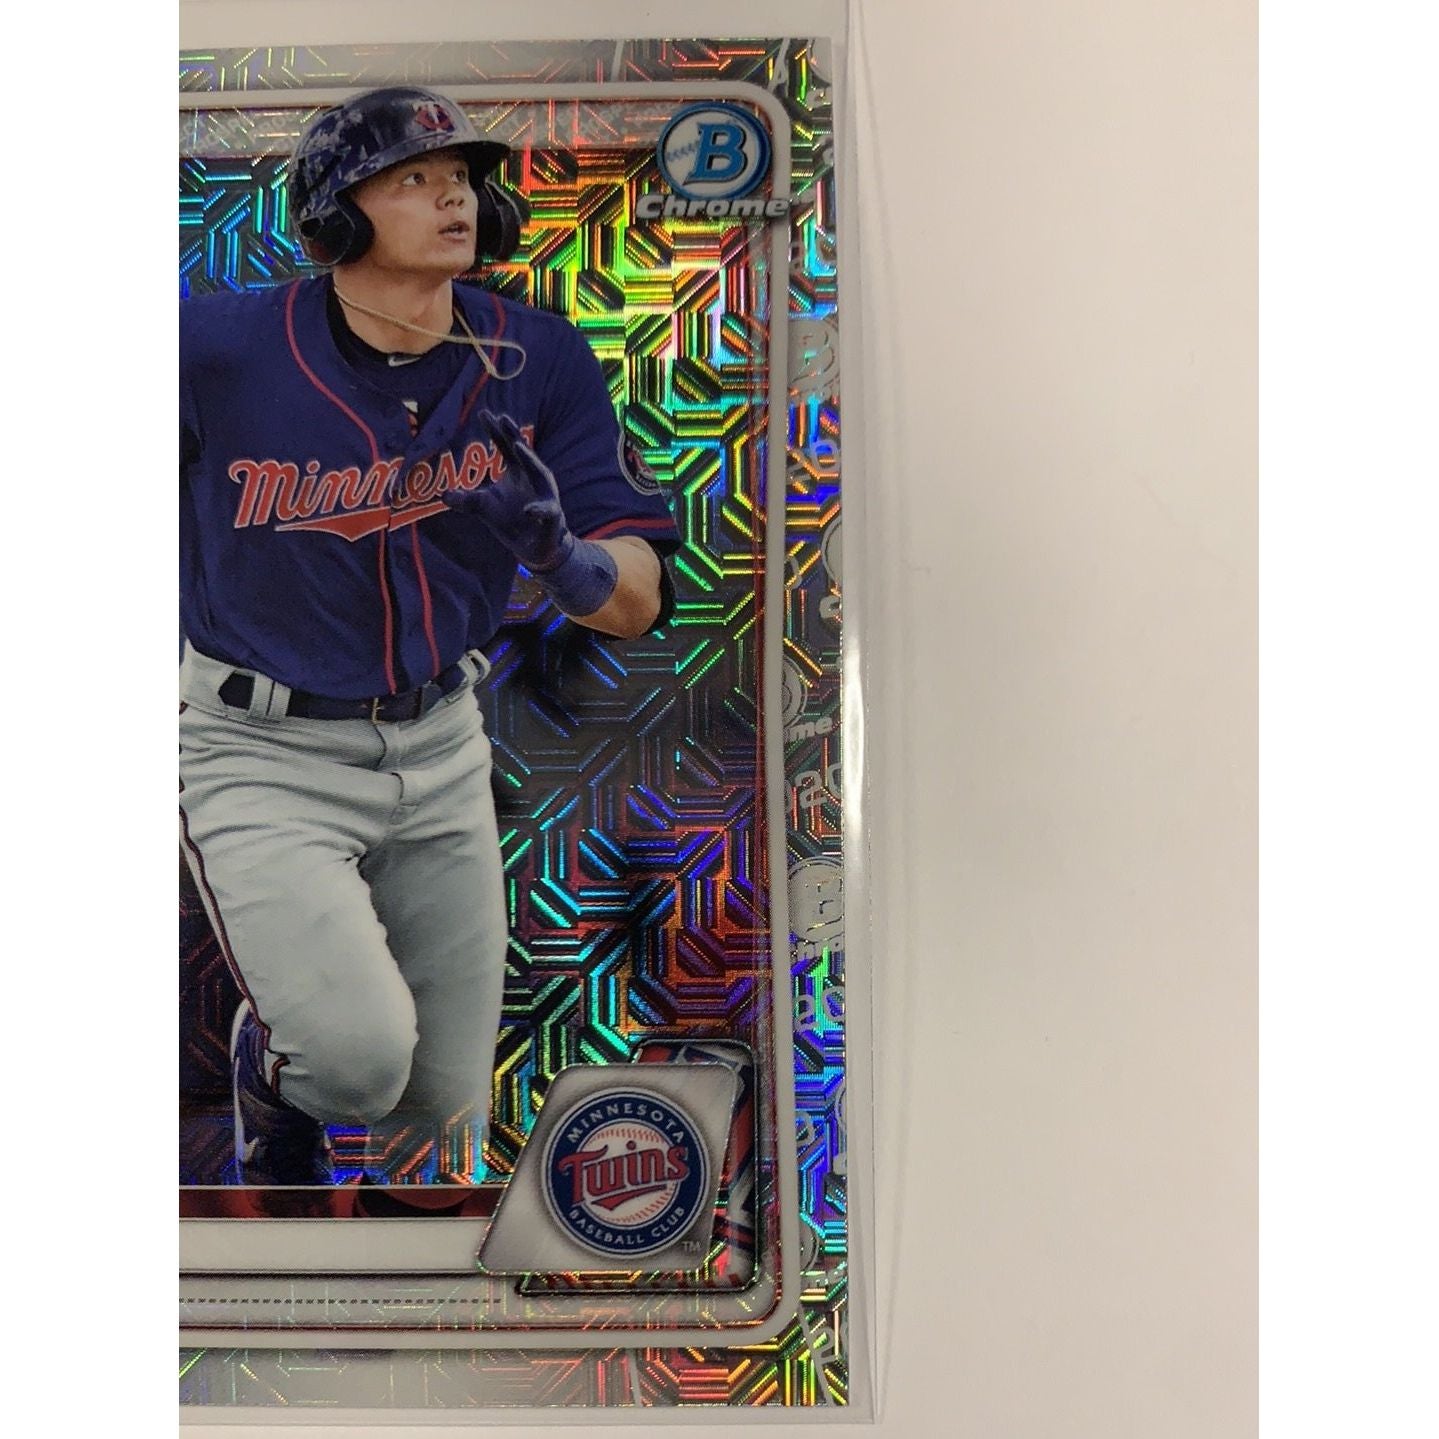  2020 Bowman Chrome Keoni Cavaco Mojo Refractor  Local Legends Cards & Collectibles